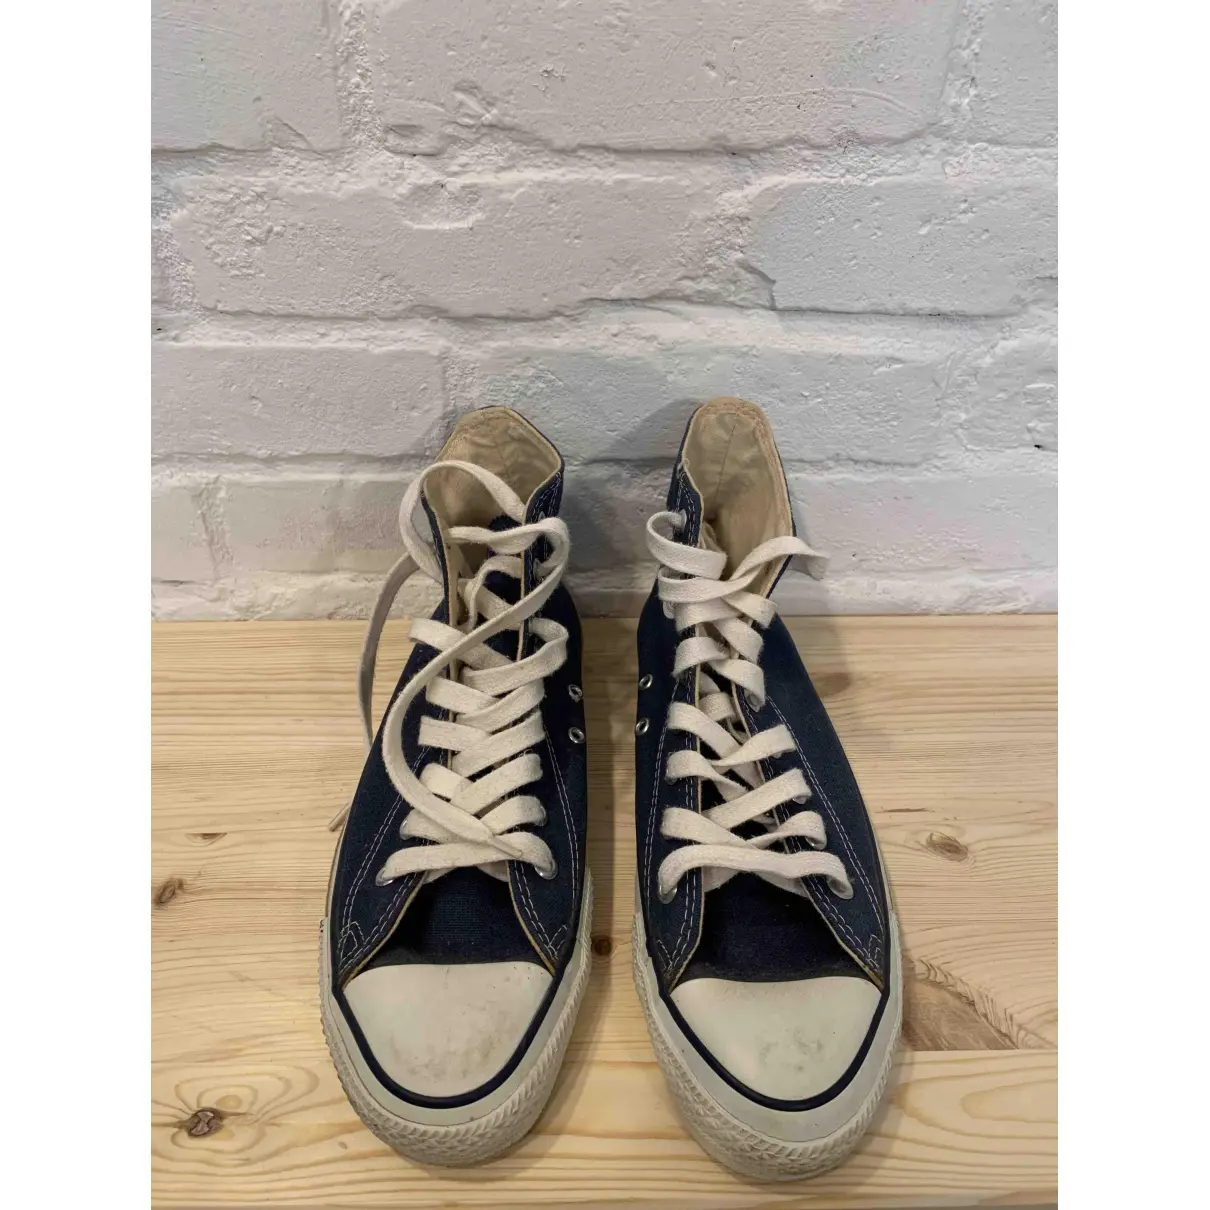 Buy Converse Cloth high trainers online - Vintage